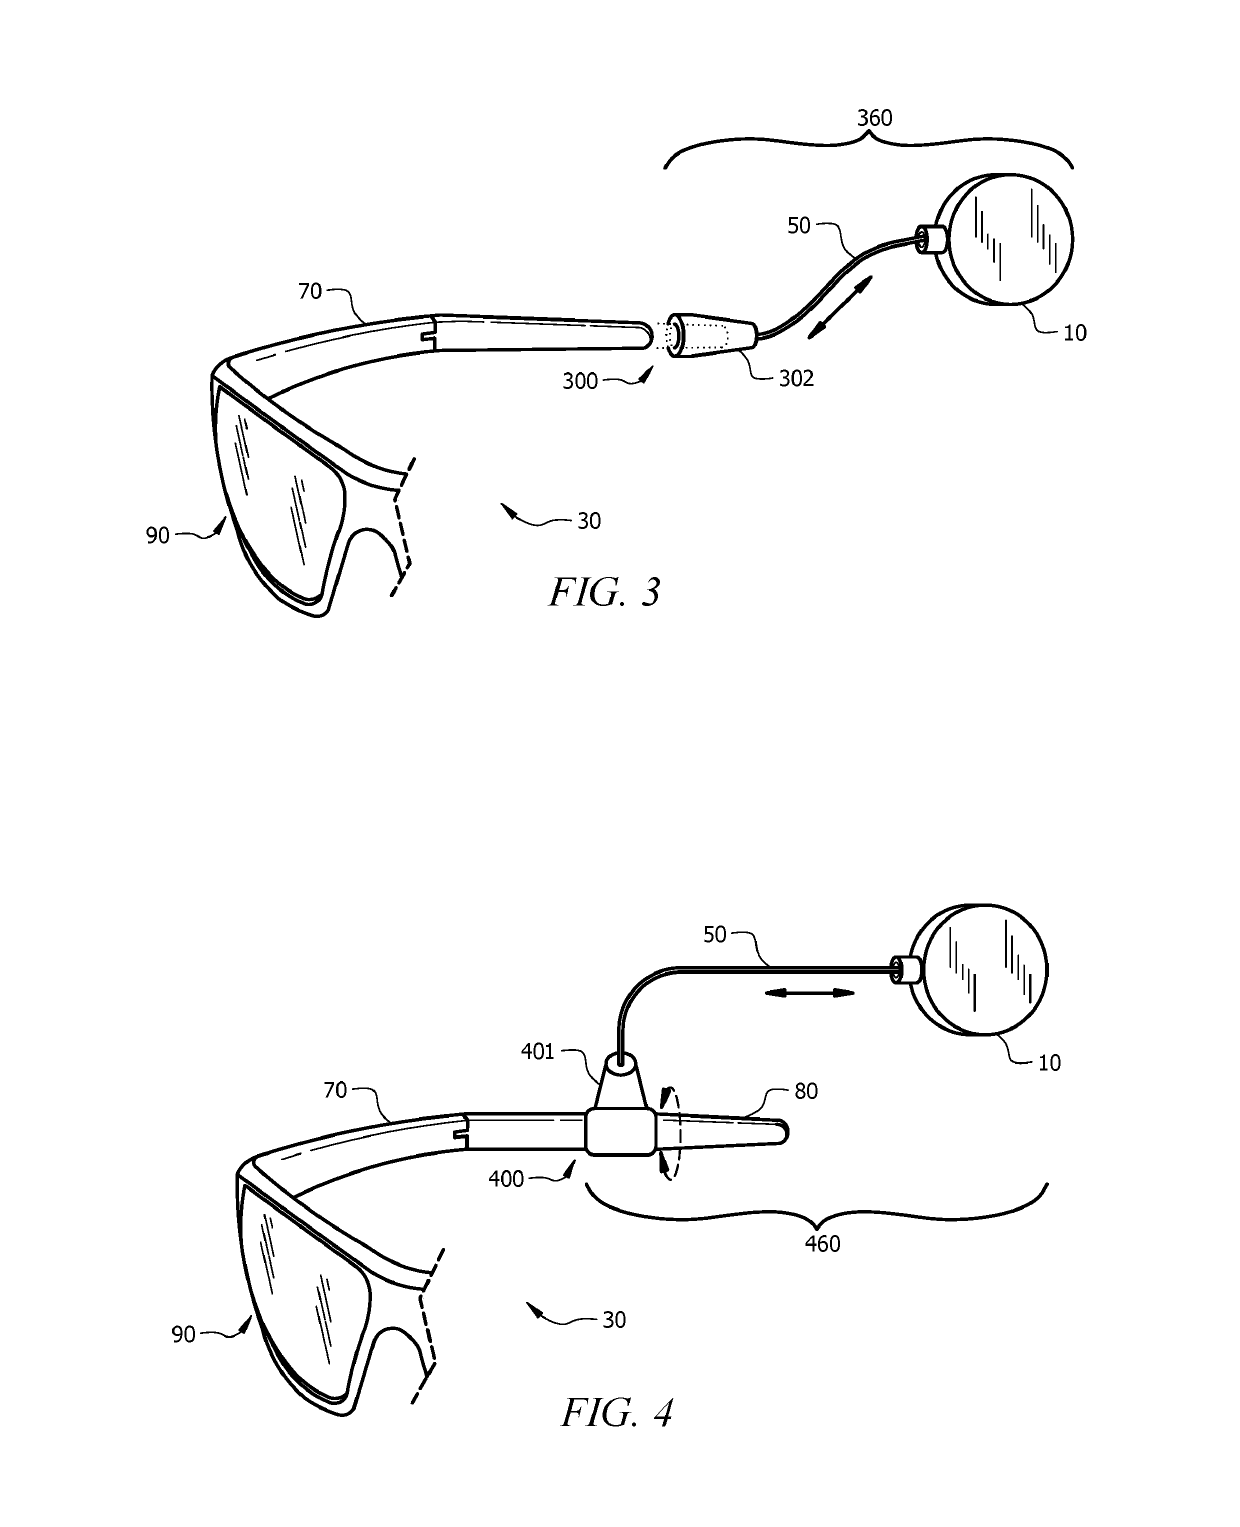 Apparatus for retractable tethering and attachment to and between headgear and eyewear and methods of making and using the same